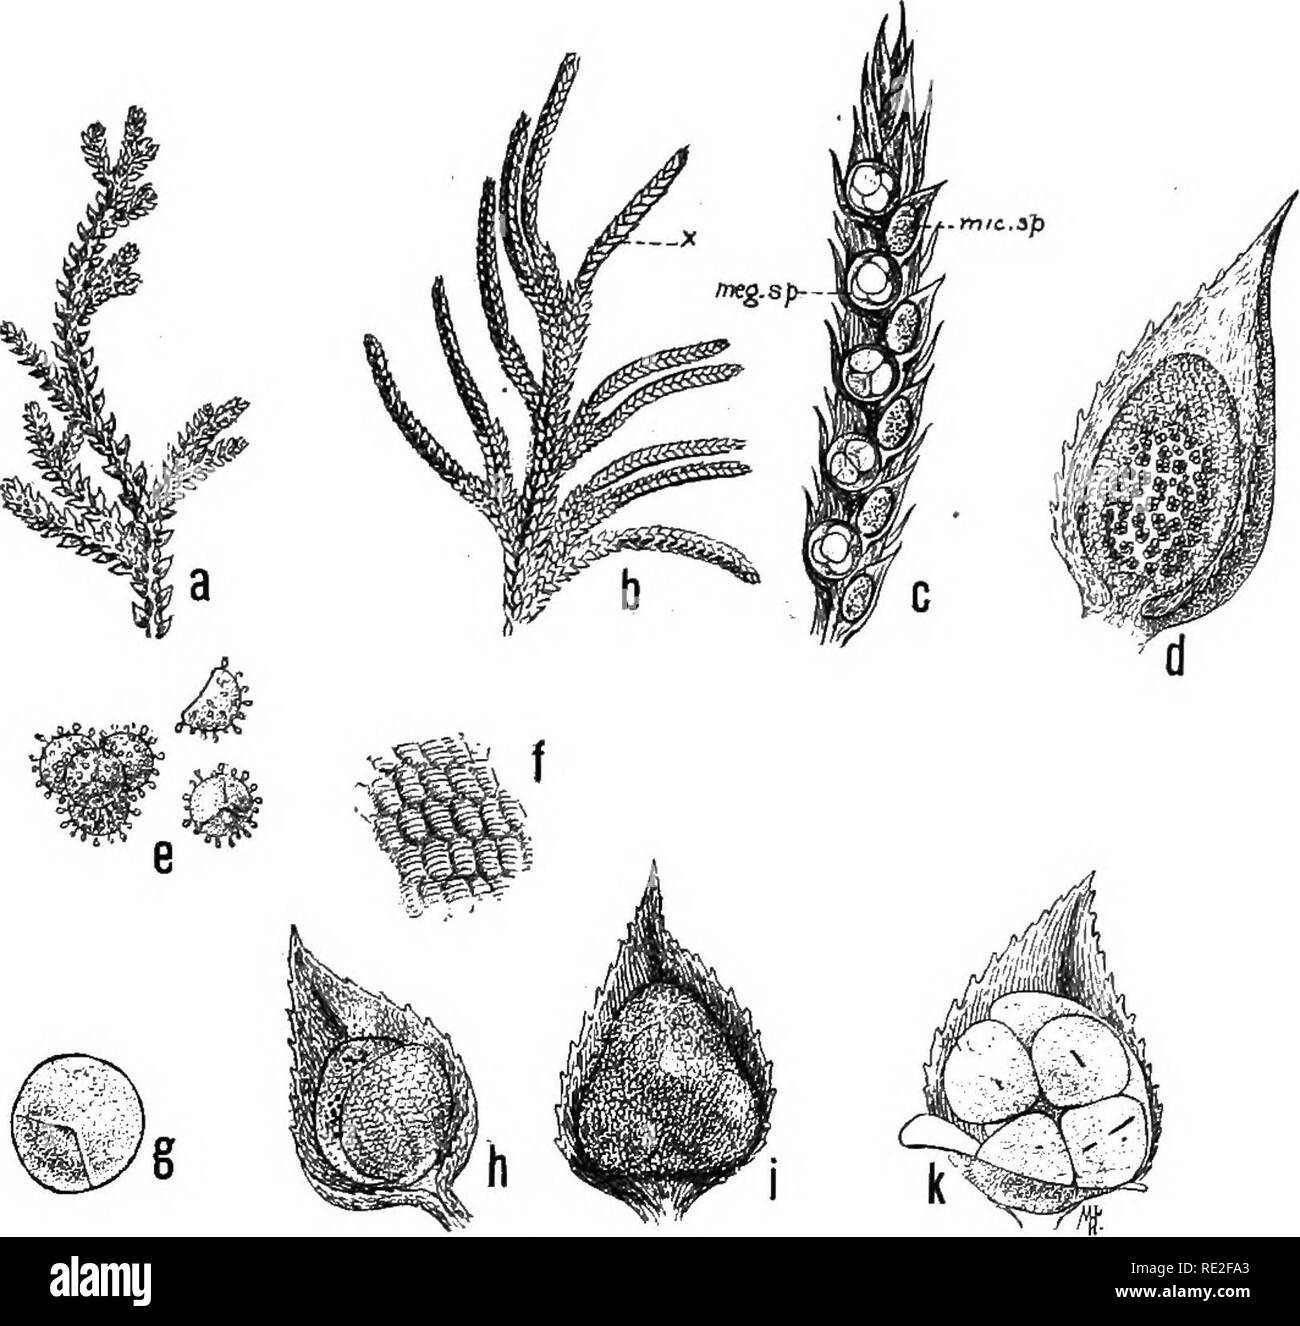 . Fundamentals of botany. Botany. CALAMITES AND LYCOPODS 38s sterile. The lower sporangia are larger than the upper ones, and bear four large spores (megaspores). They are megasporangia, and the leaves are megasporophylls. The. Fig. 281.—Selaginella Martensii. a, vegetative branch; b, portion of the stem, bearing cones k); c, longitudinal section of a cone, showing microsporangia {mic. sp.) in the axils of microsporophyUs, and megaspor- angia in the aMls of megaspoiophylls; d, microsporangium with micro- sporophyll; e, microspores;/, pornon of wall of sporangium, greatly magni- fied; g, megas Stock Photo